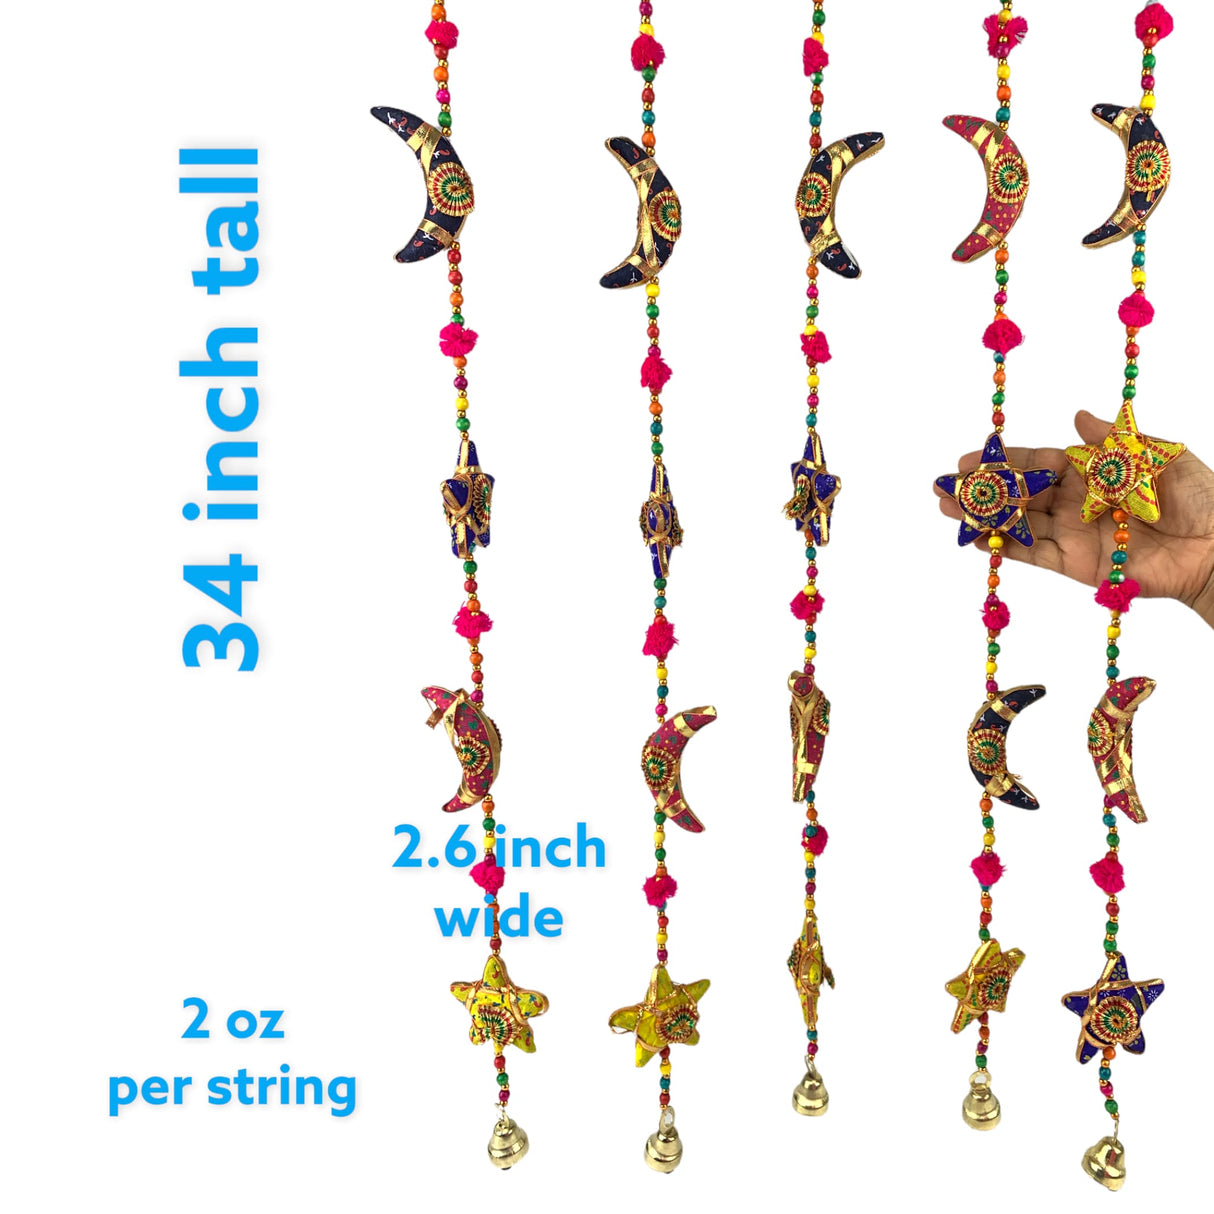 Rajasthani door hanging moon star wind chime traditional